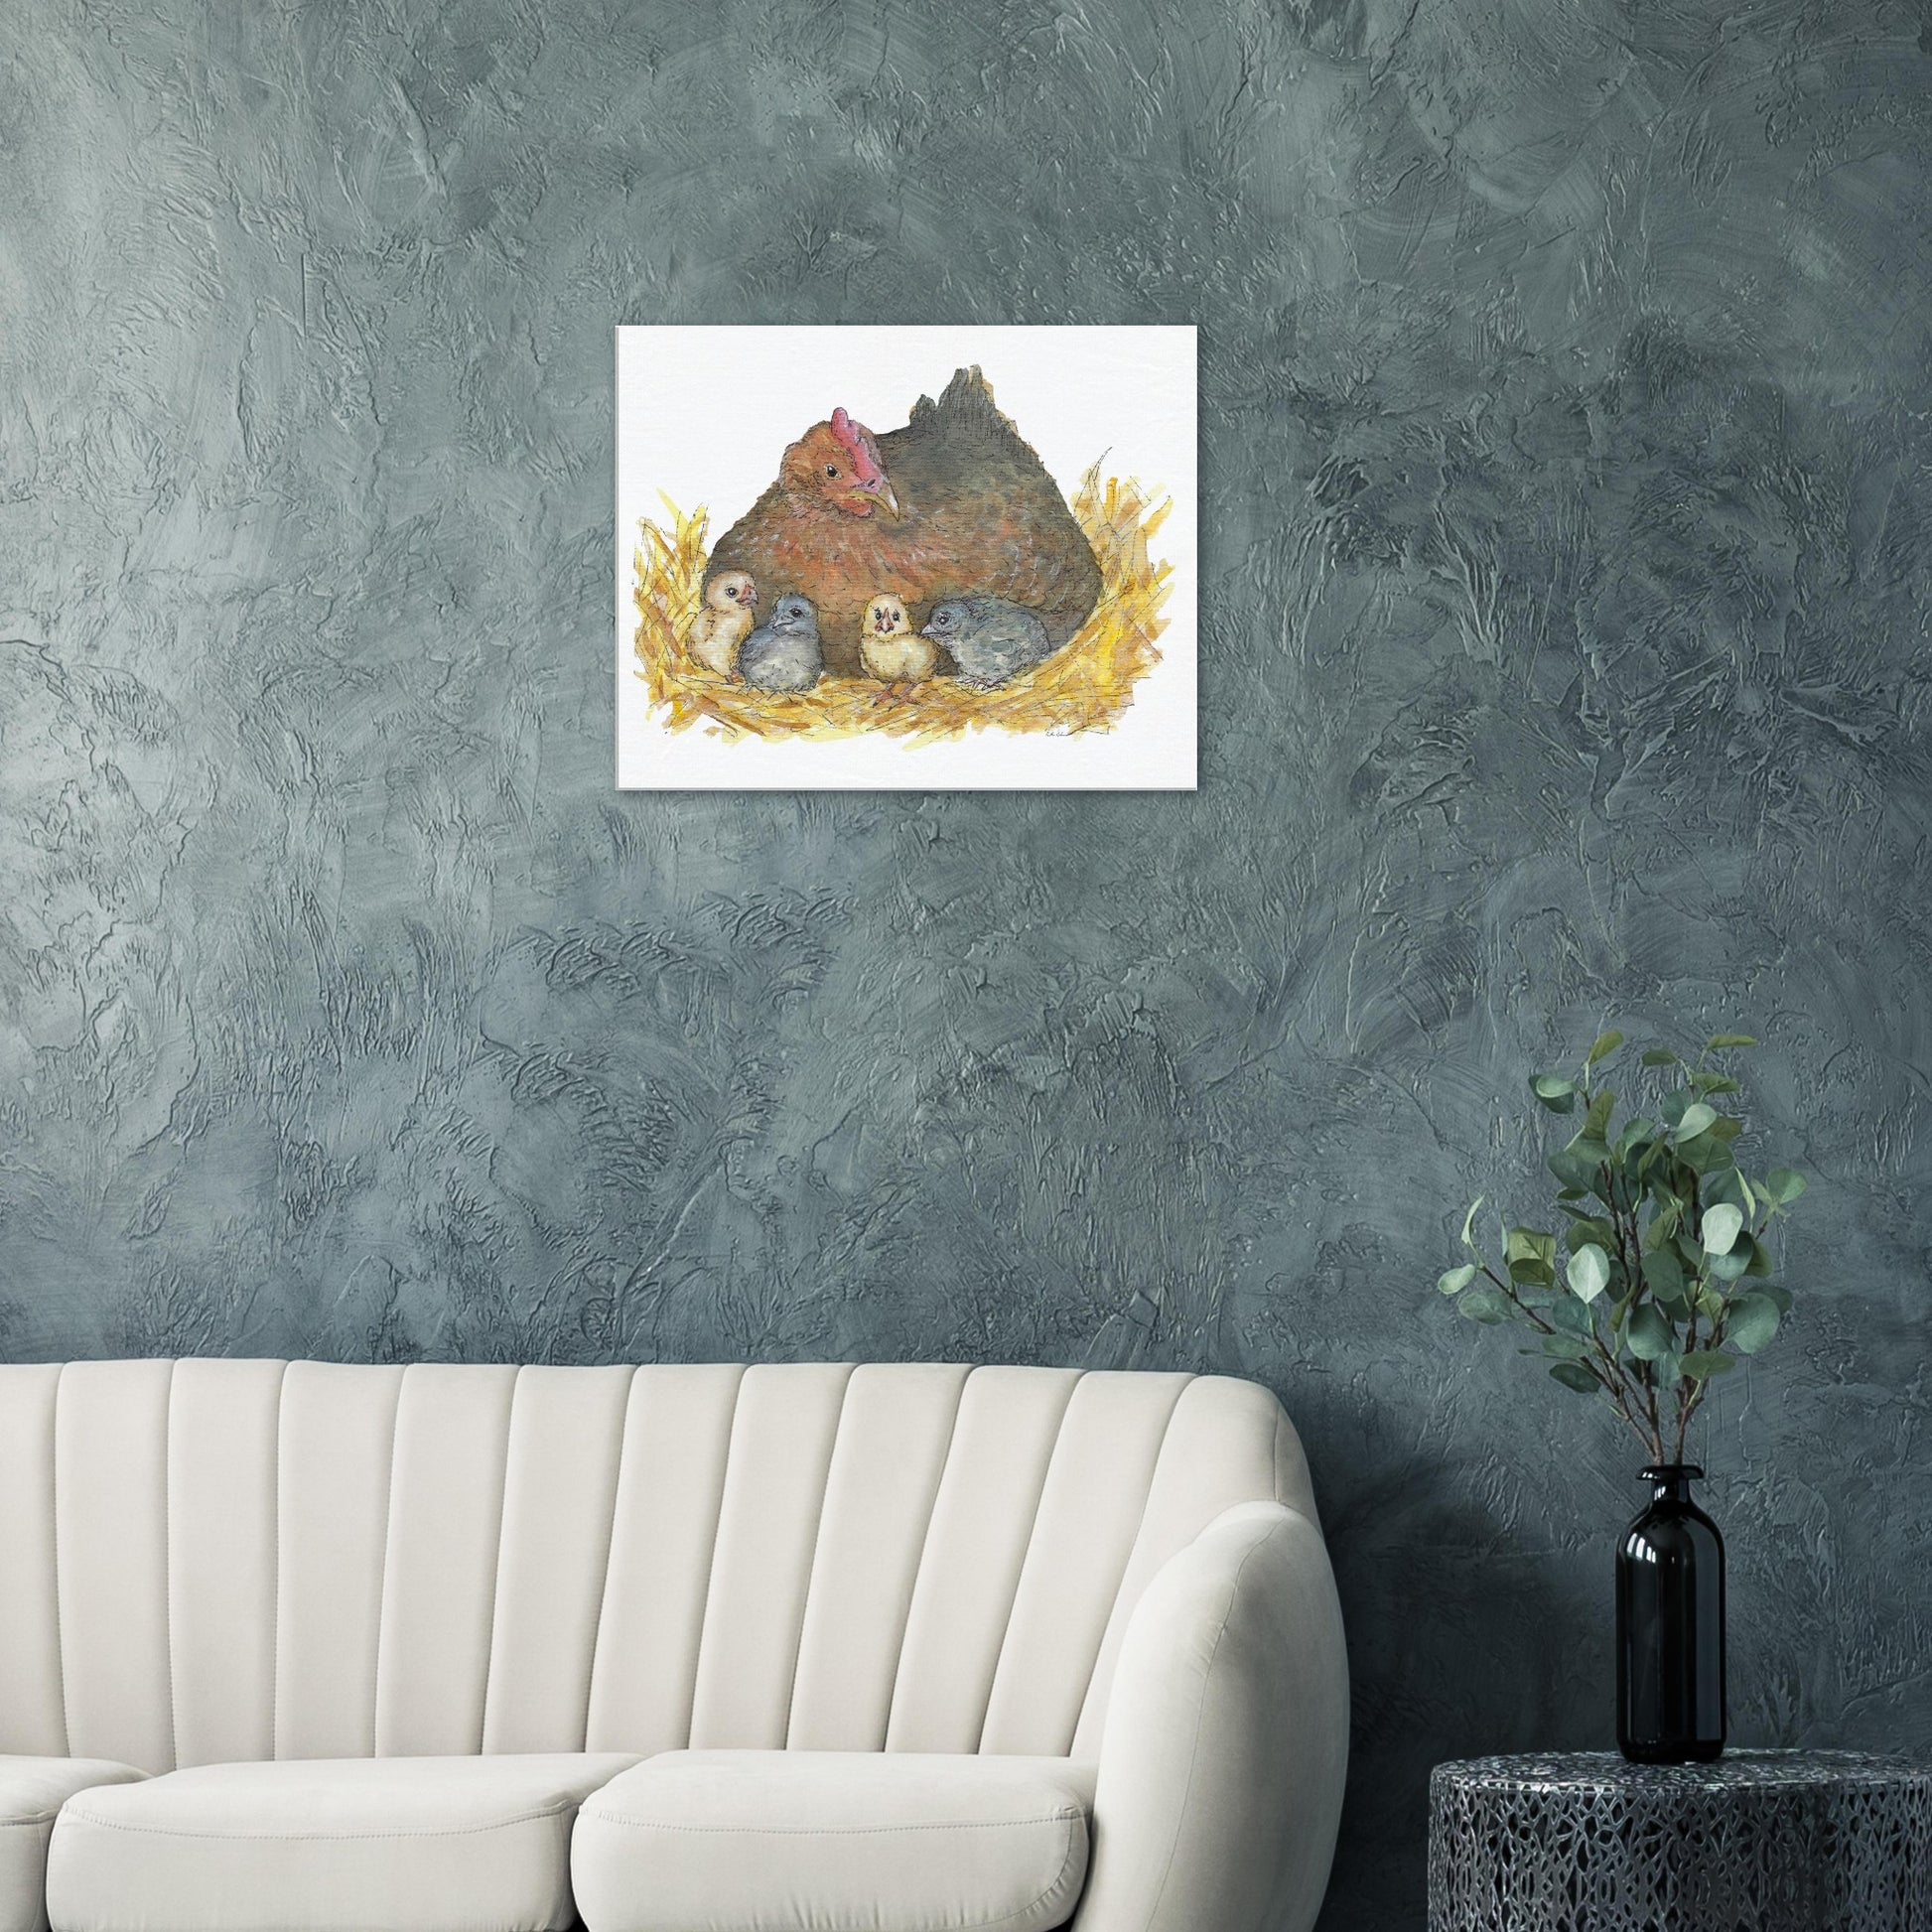 24 by 30 inch slim canvas Mother Hen print. Features a watercolor mother hen and her four chicks in a nest. Shown on green wall above white sofa.